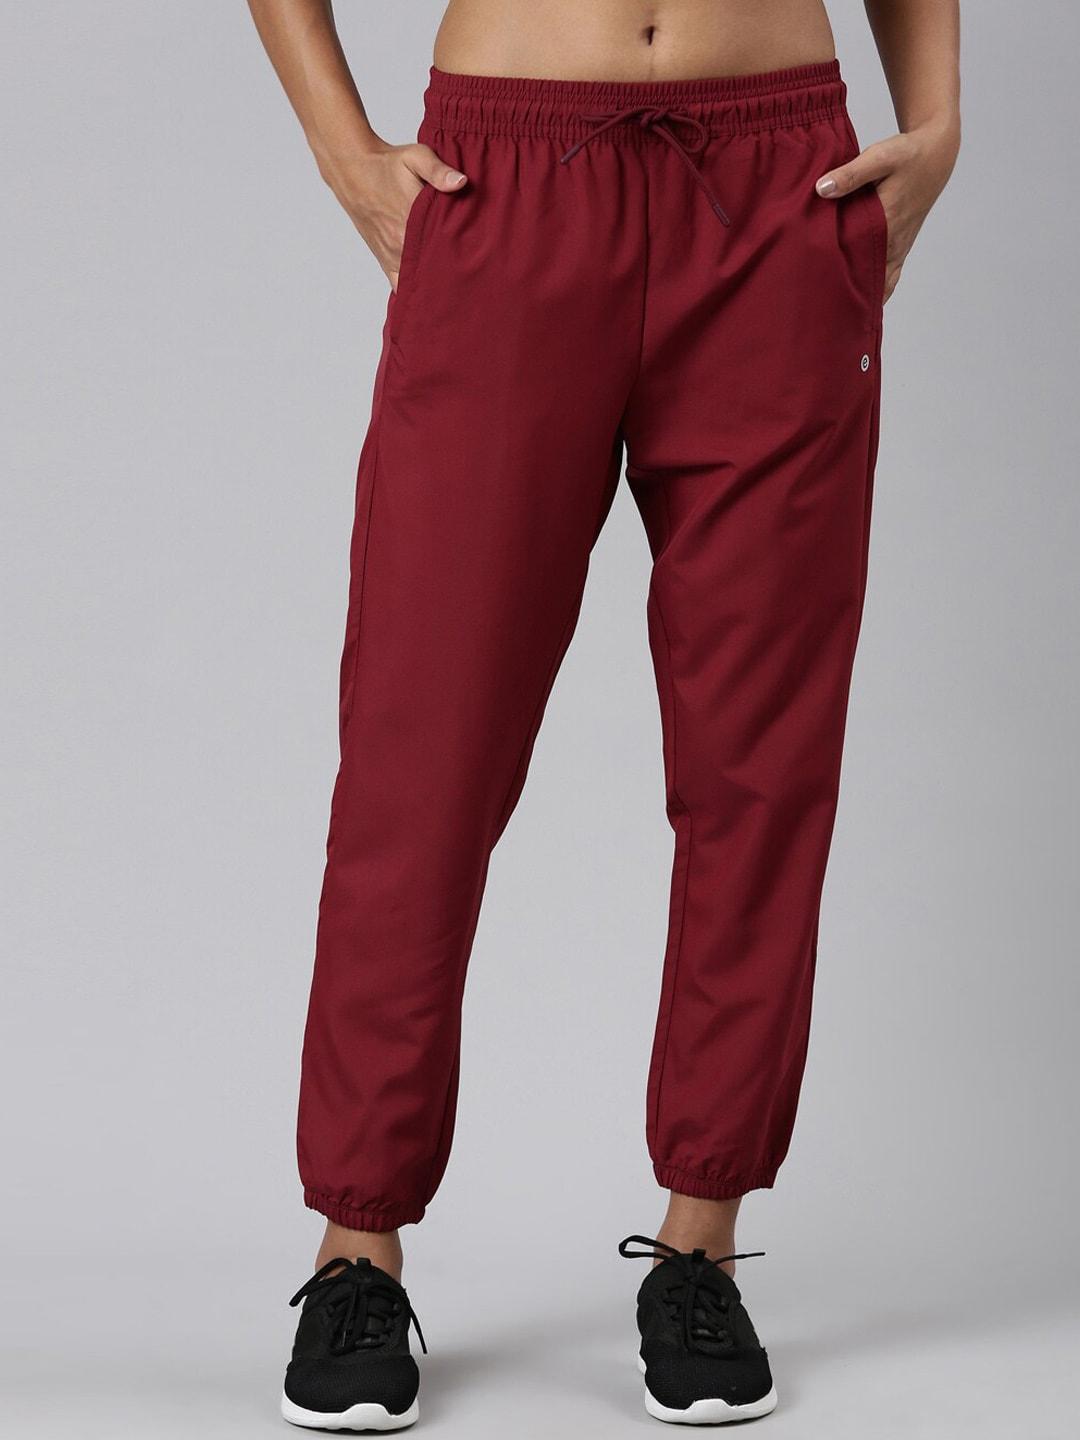 enamor women relaxed fit mid-rise sports joggers